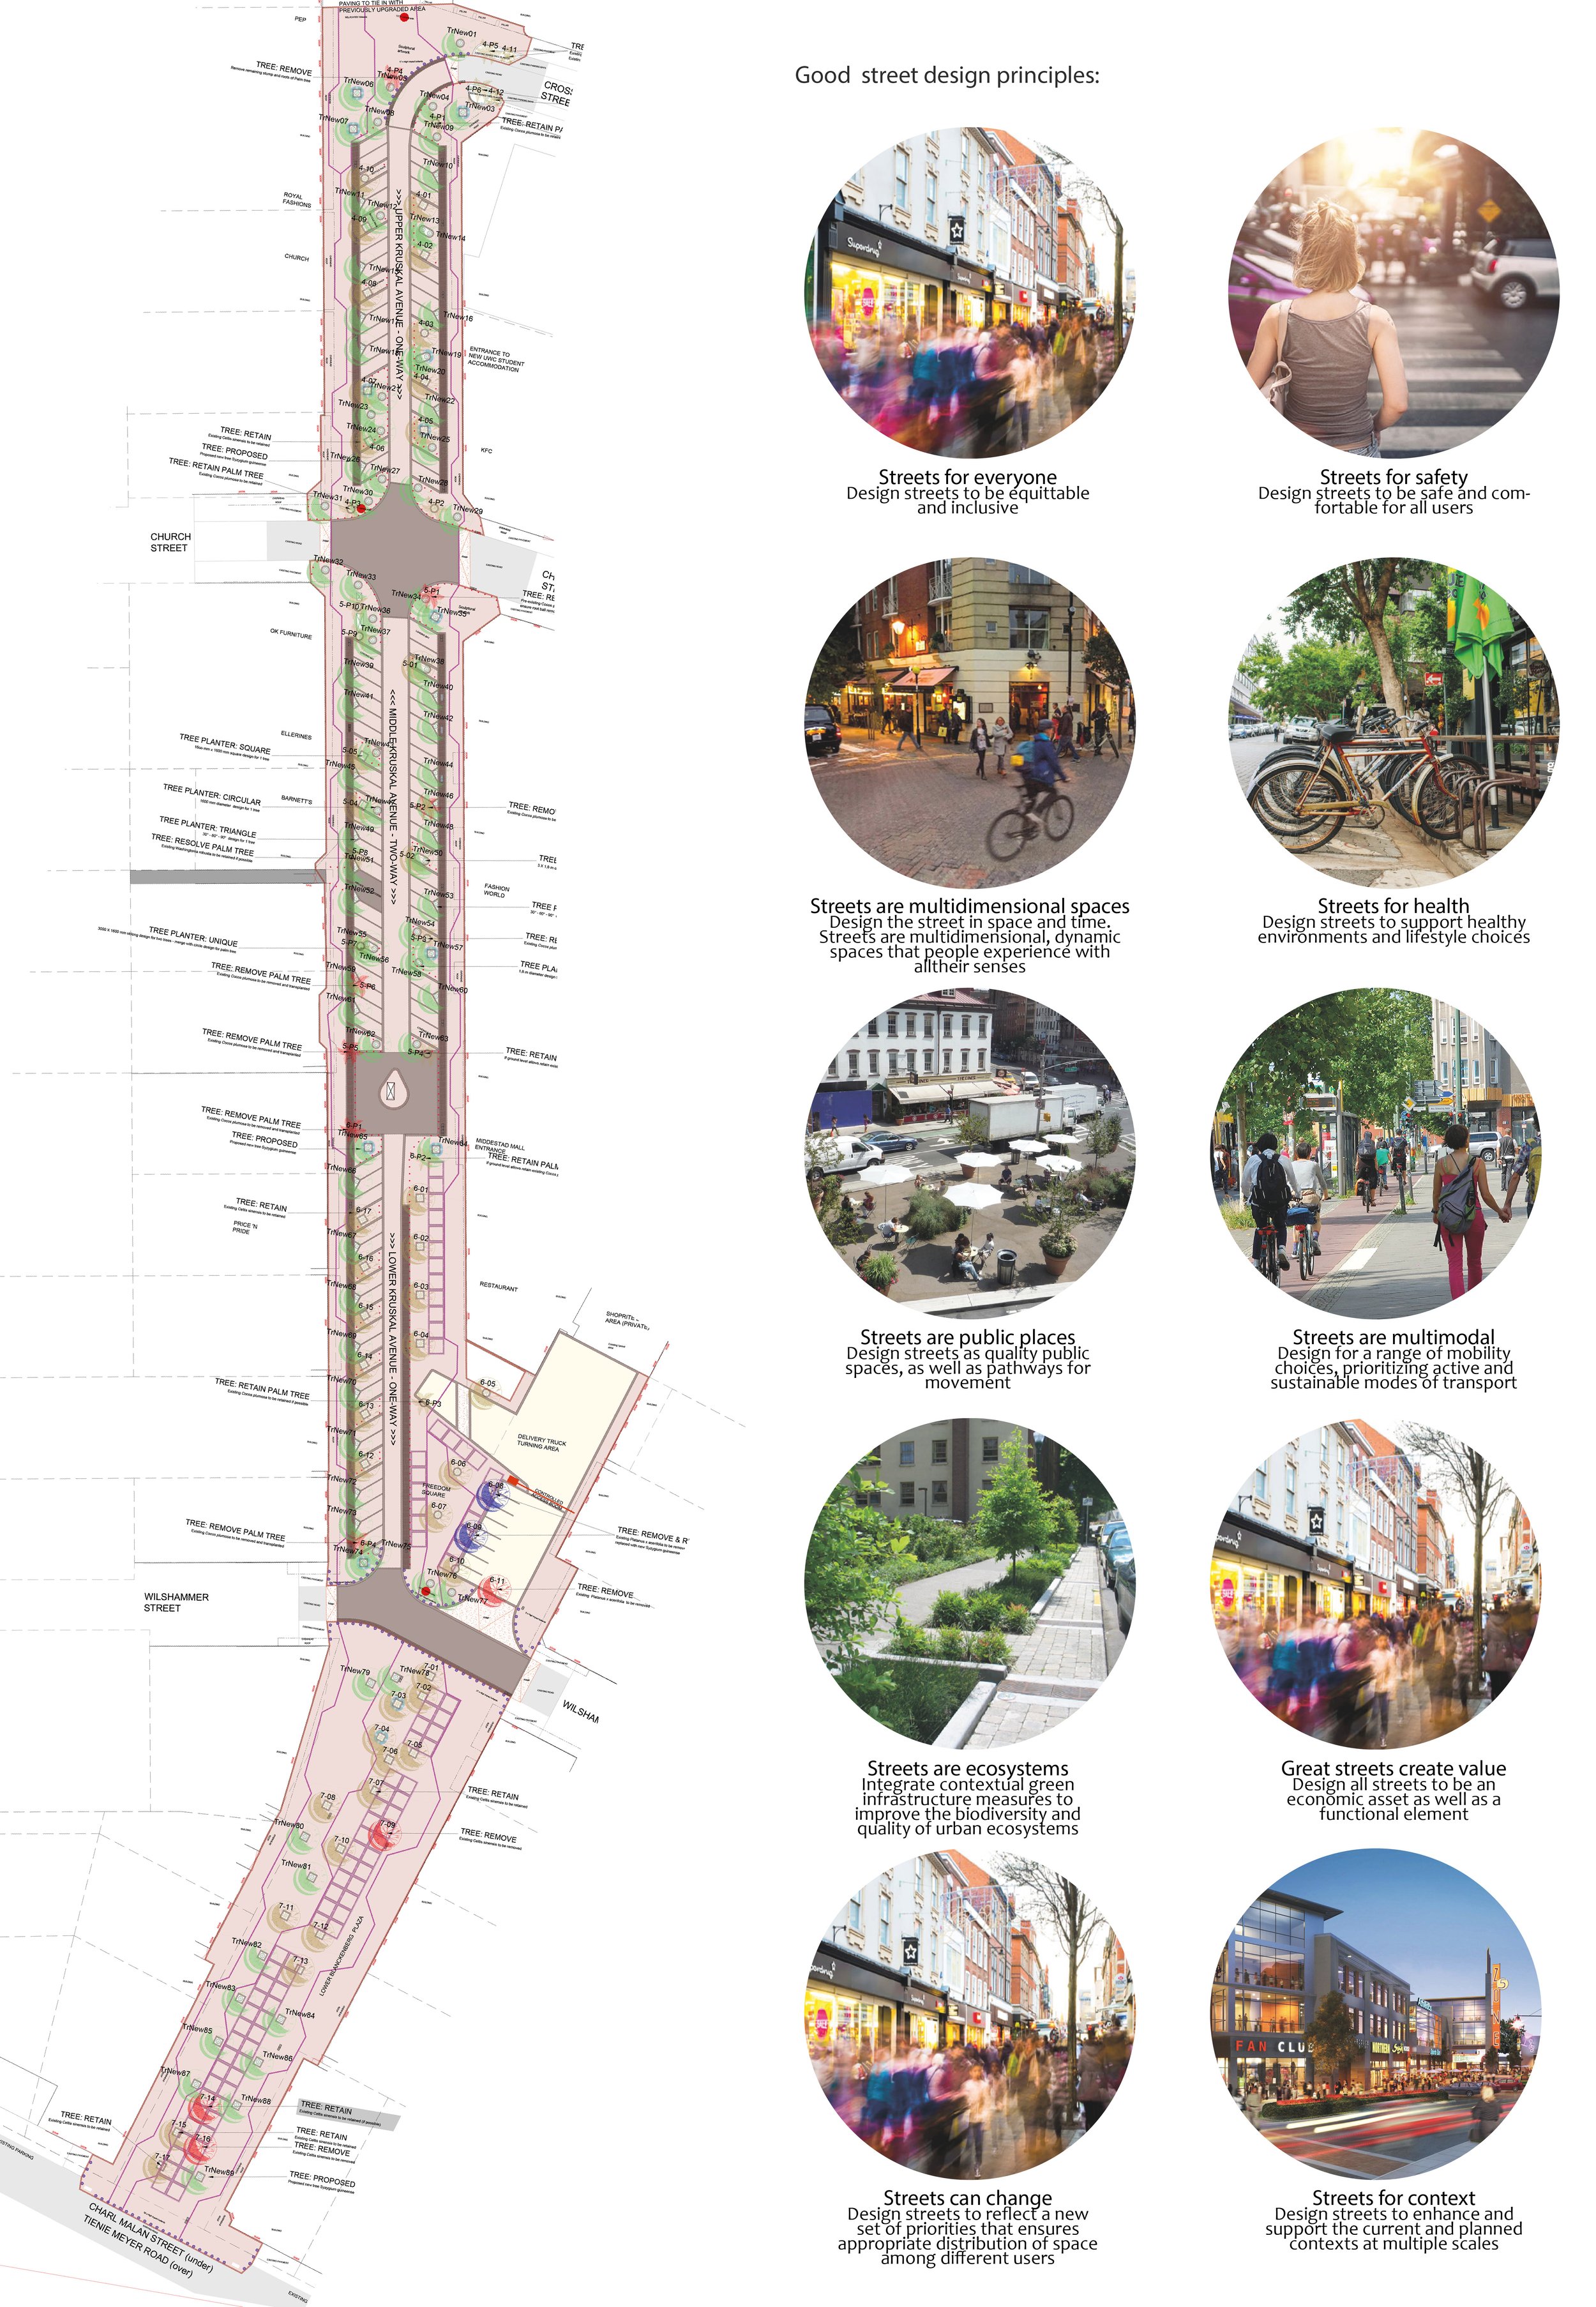  The design encompasses several key elements, including the introduction of fresh paved surfaces, the transplantation and planting of street trees, provision for street traders, and an overhaul of essential infrastructure like stormwater management. 